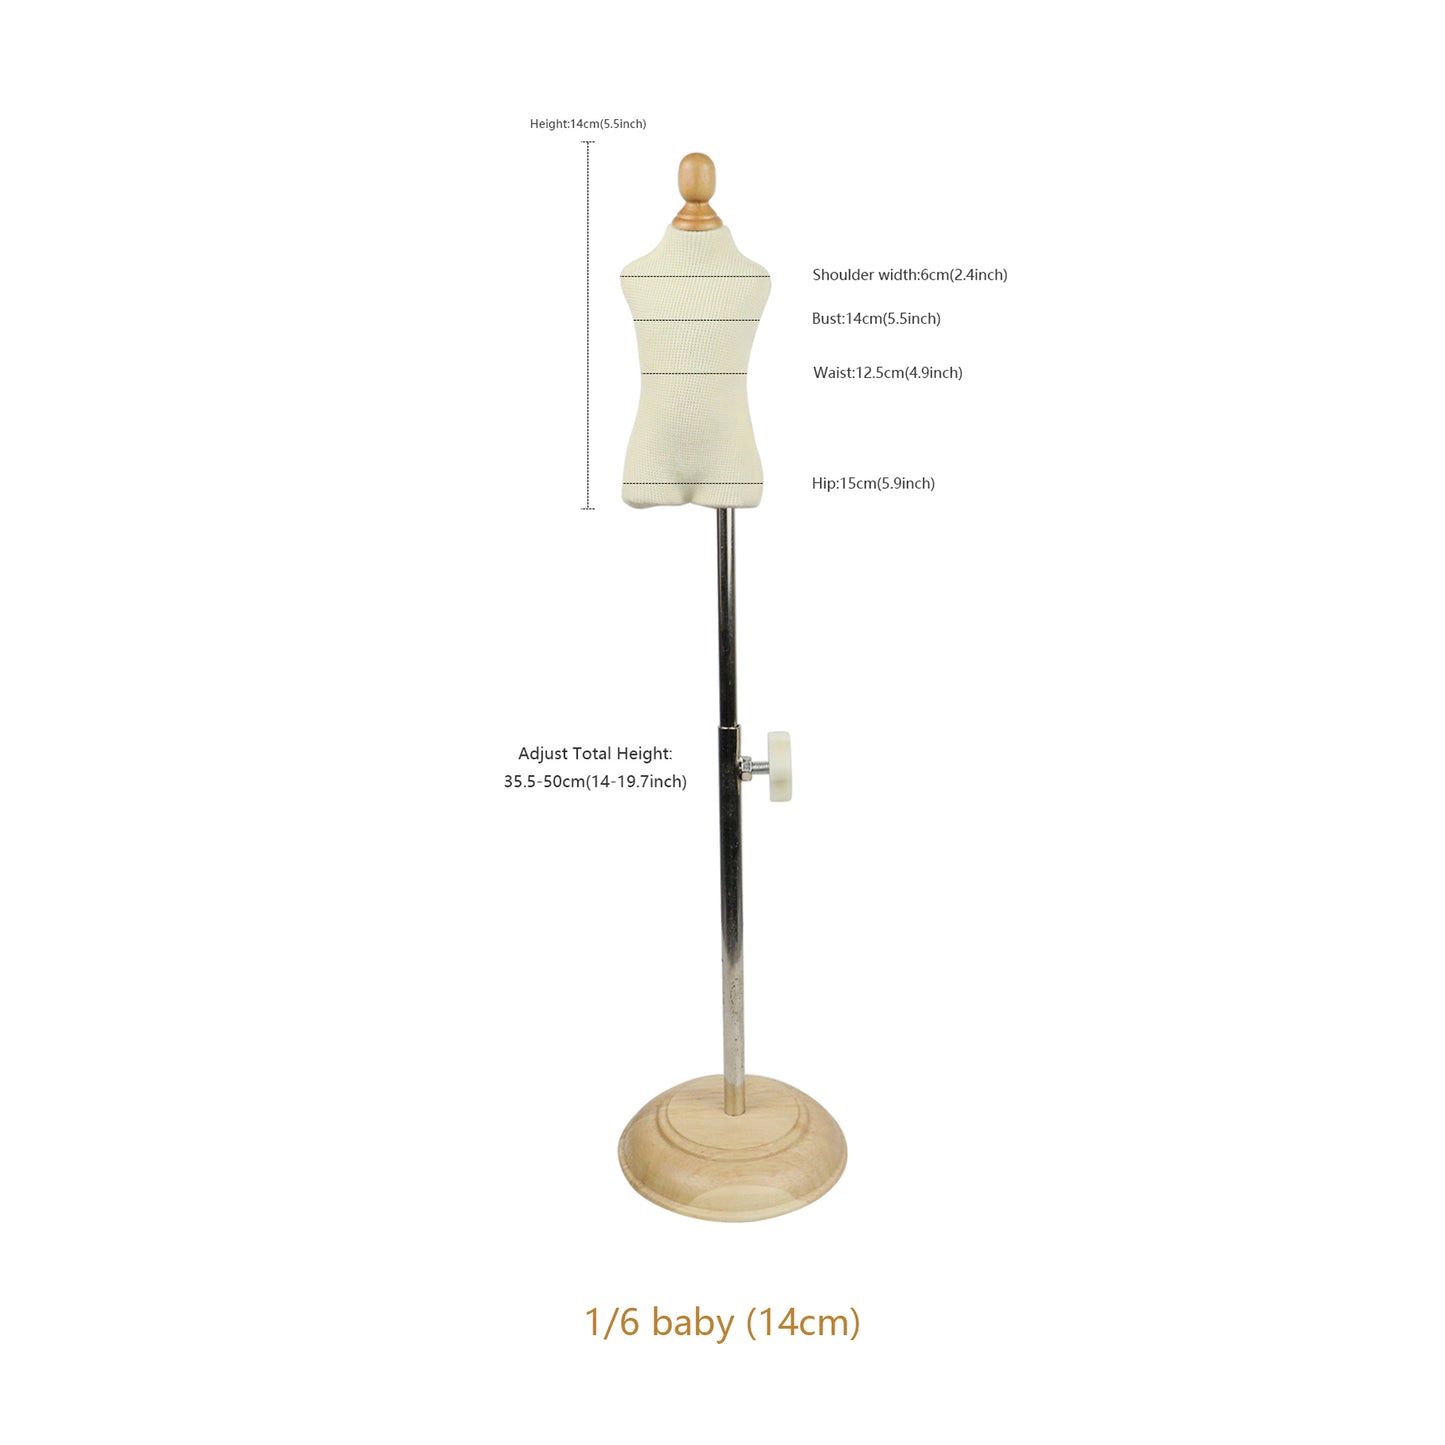 DE-LIANG Mini Baby Dress Form,1:6 Scale Size Sewing Display Mannequin Form Fully Pinable, 1/6 Foam Flexible Dressmaker Pattern Dress form with Base DE-LIANG